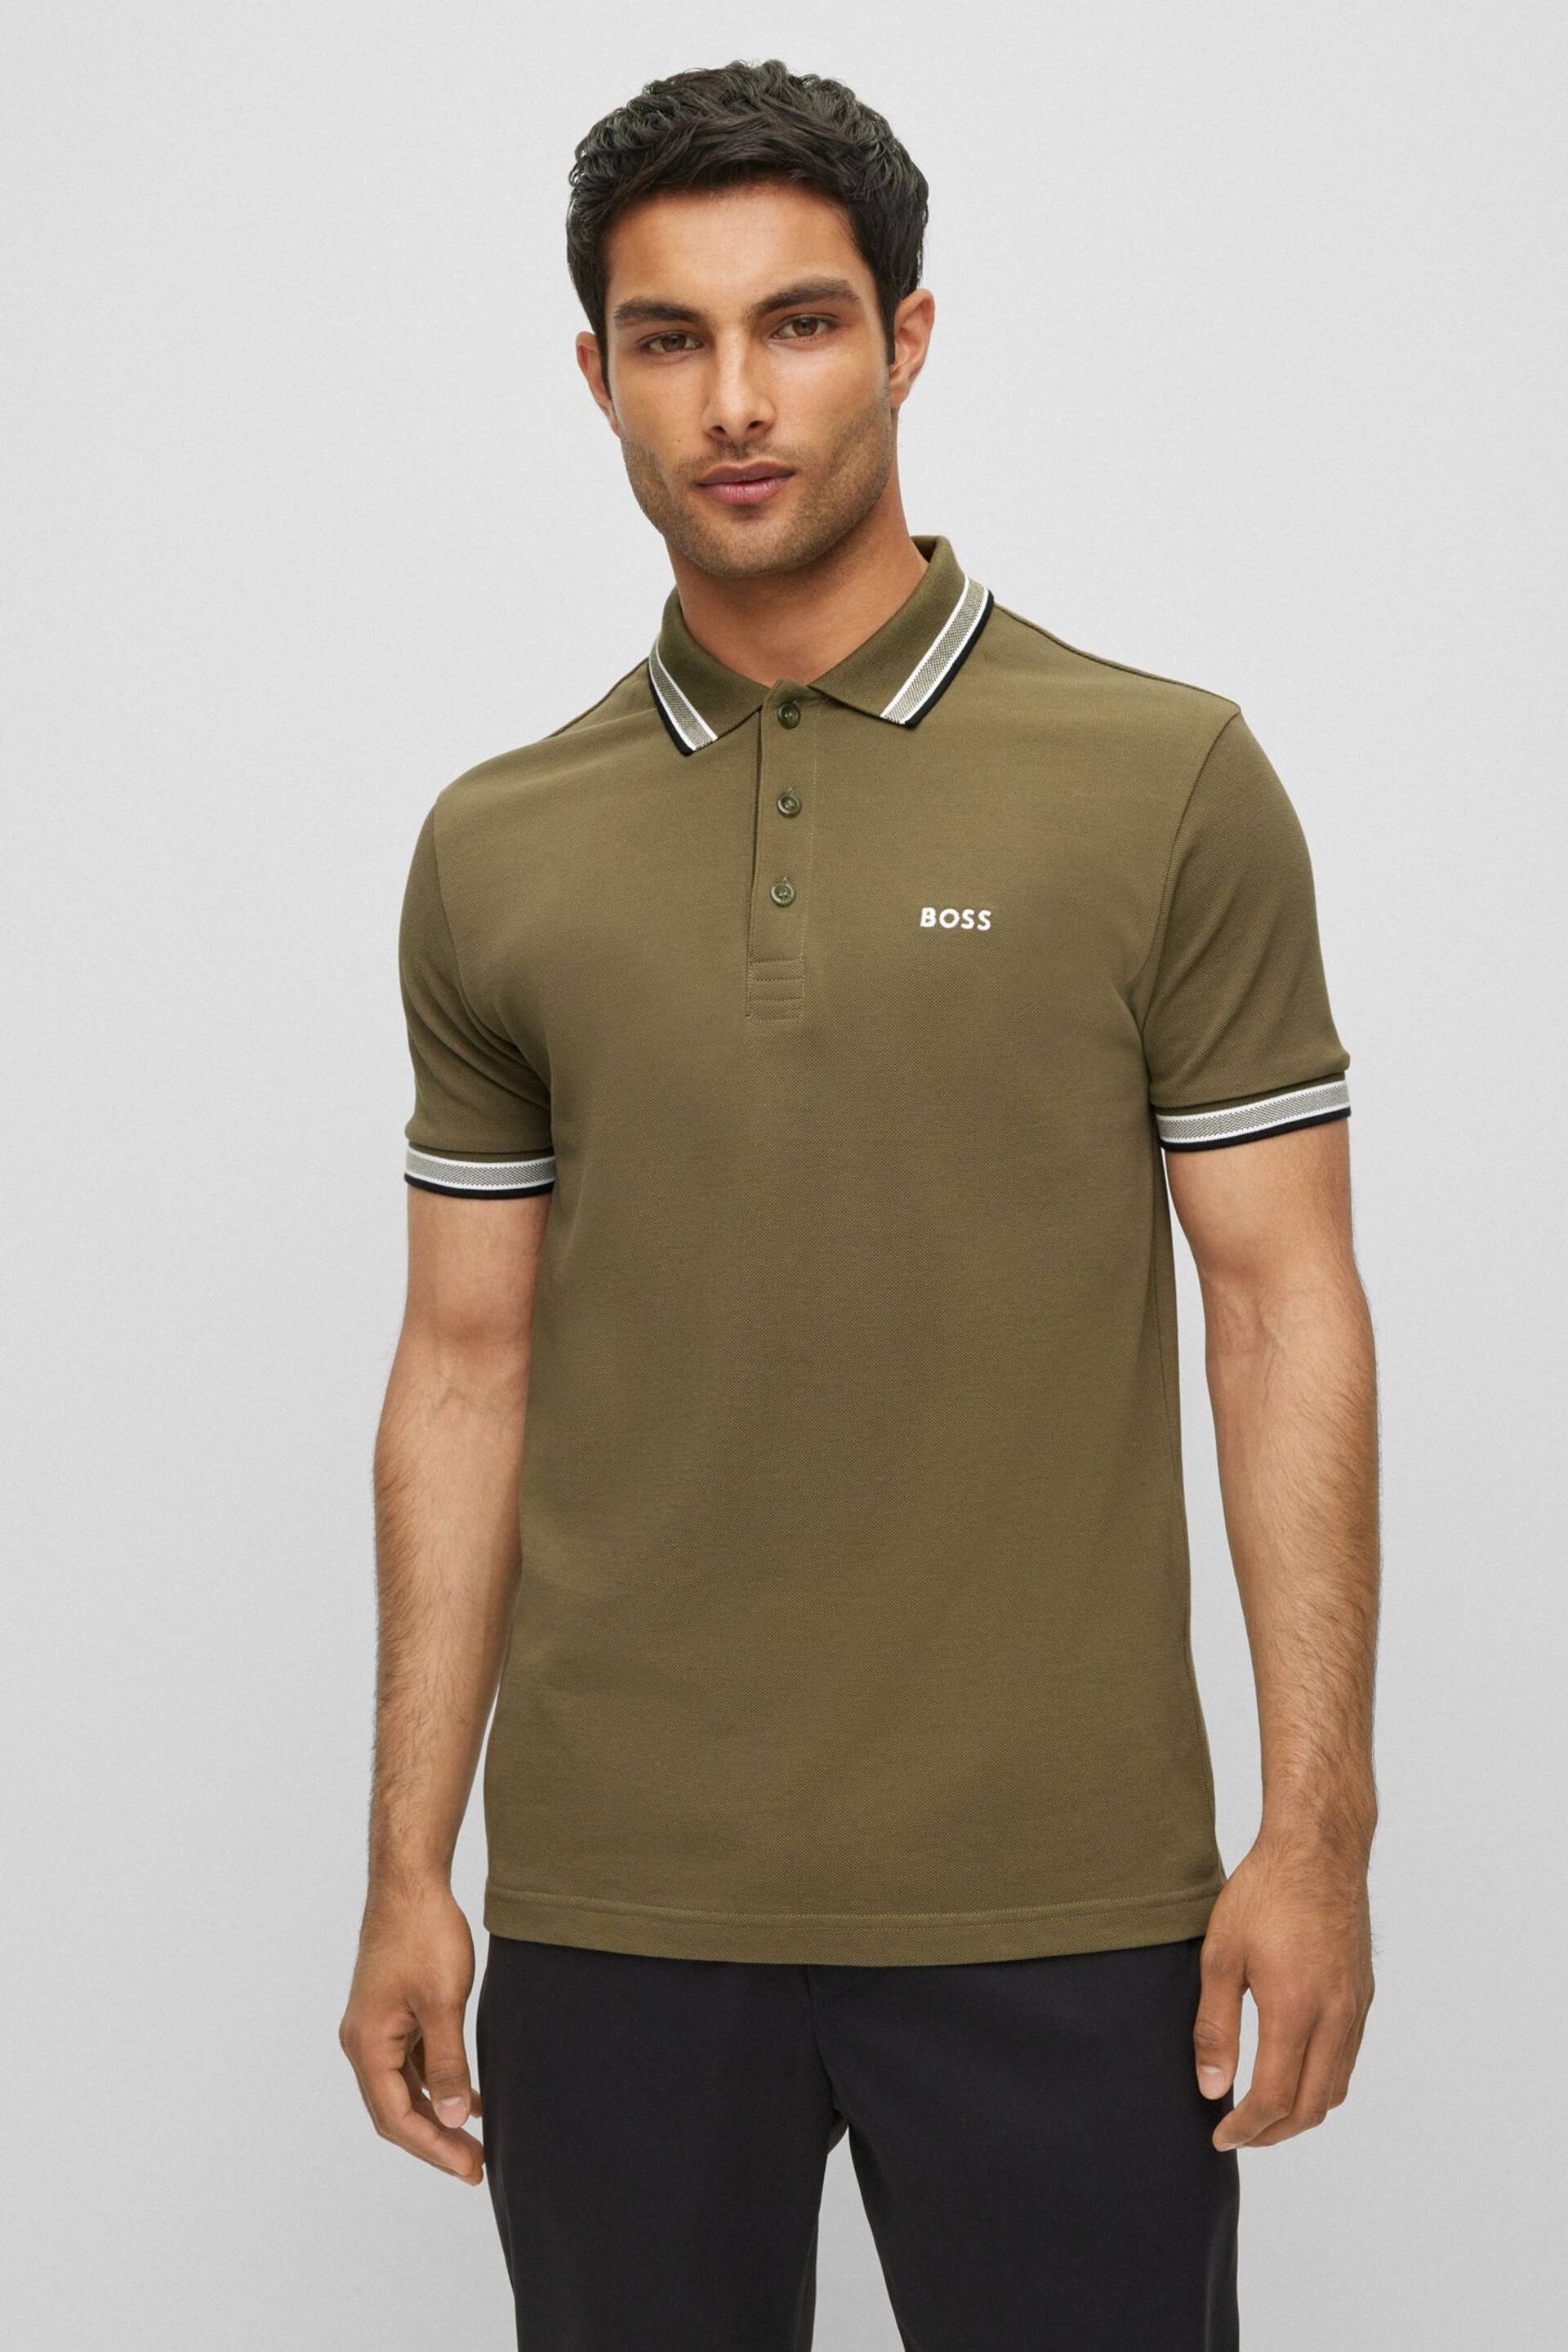 BOSS Olive Green/Black Tipping Paddy Polo Pink Cream Shirt - Image 1 of 5